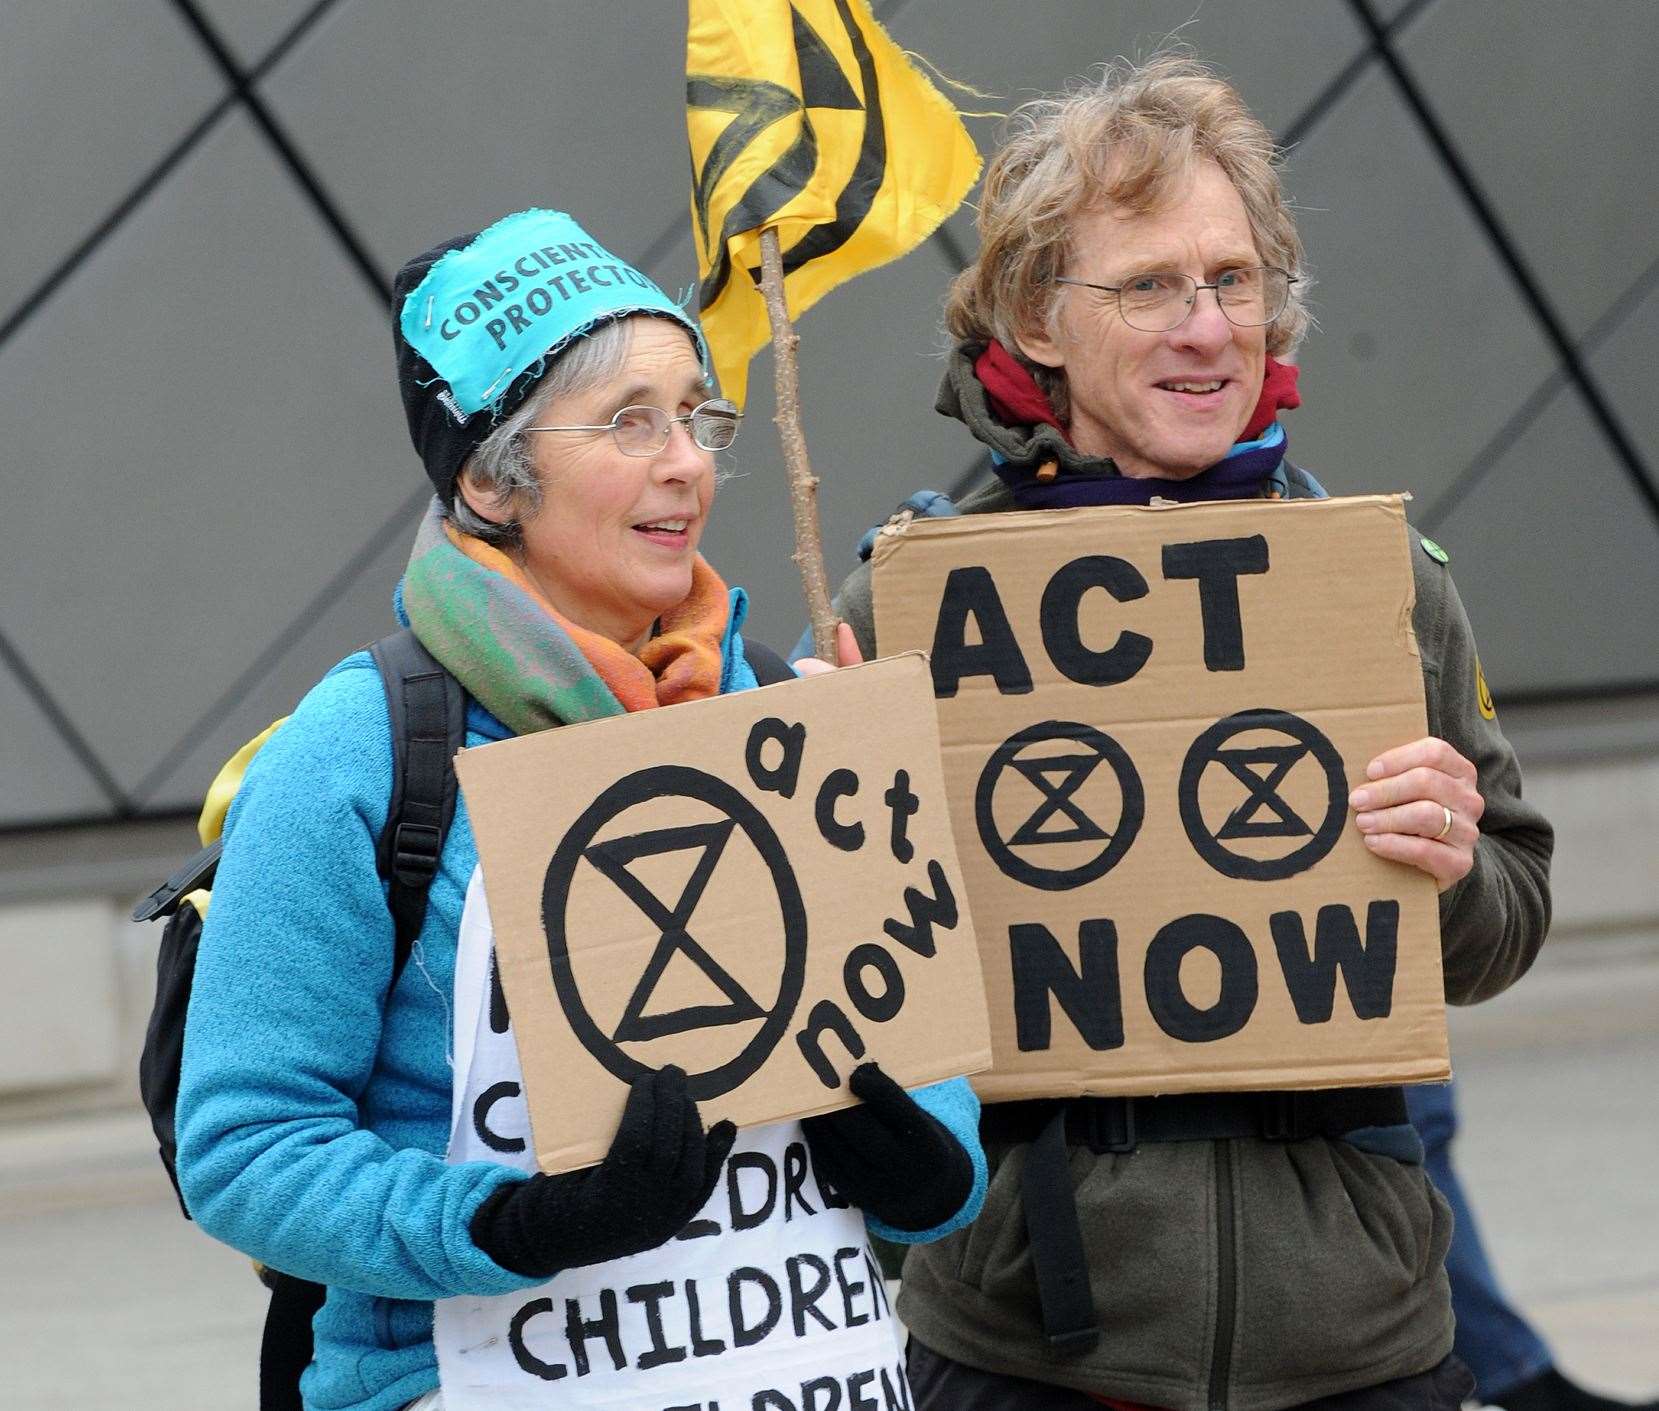 Extinction Rebellion is a non-violent protest organisation which is trying to get the government to do something about climate change